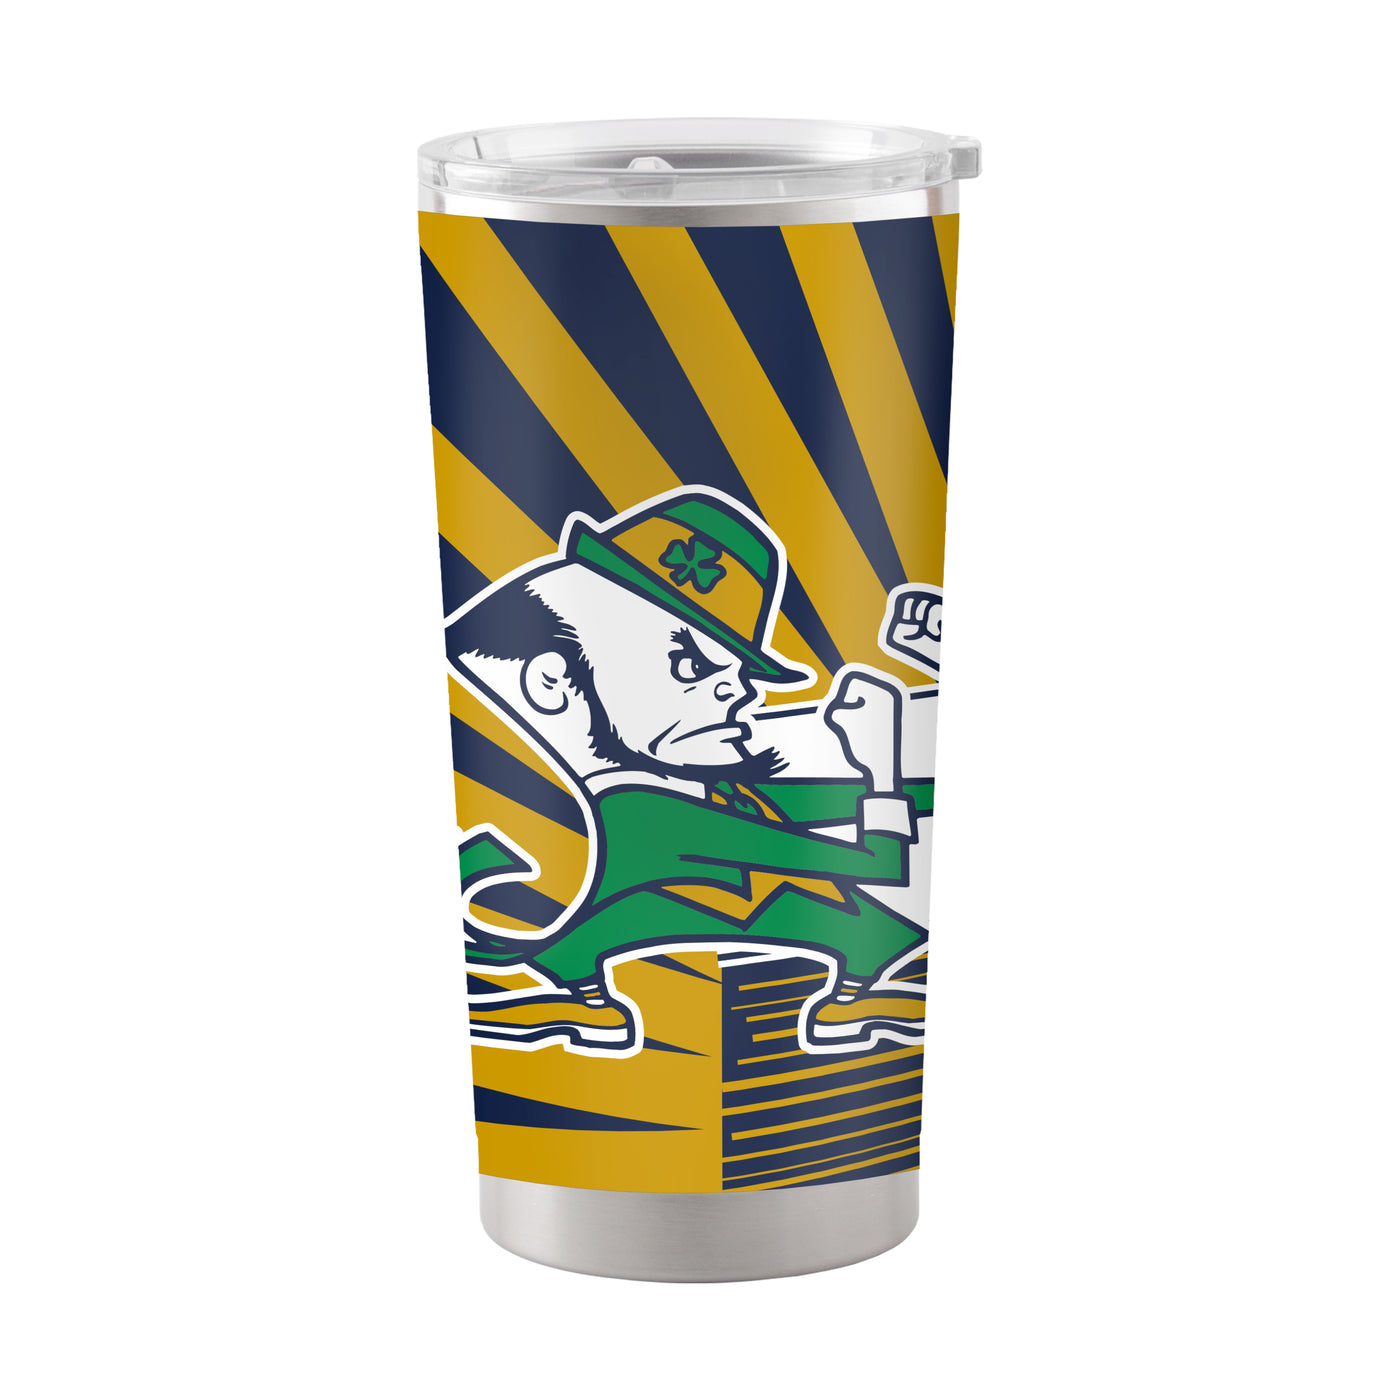 Notre Dame 20oz Mascot Stainless Steel Tumbler